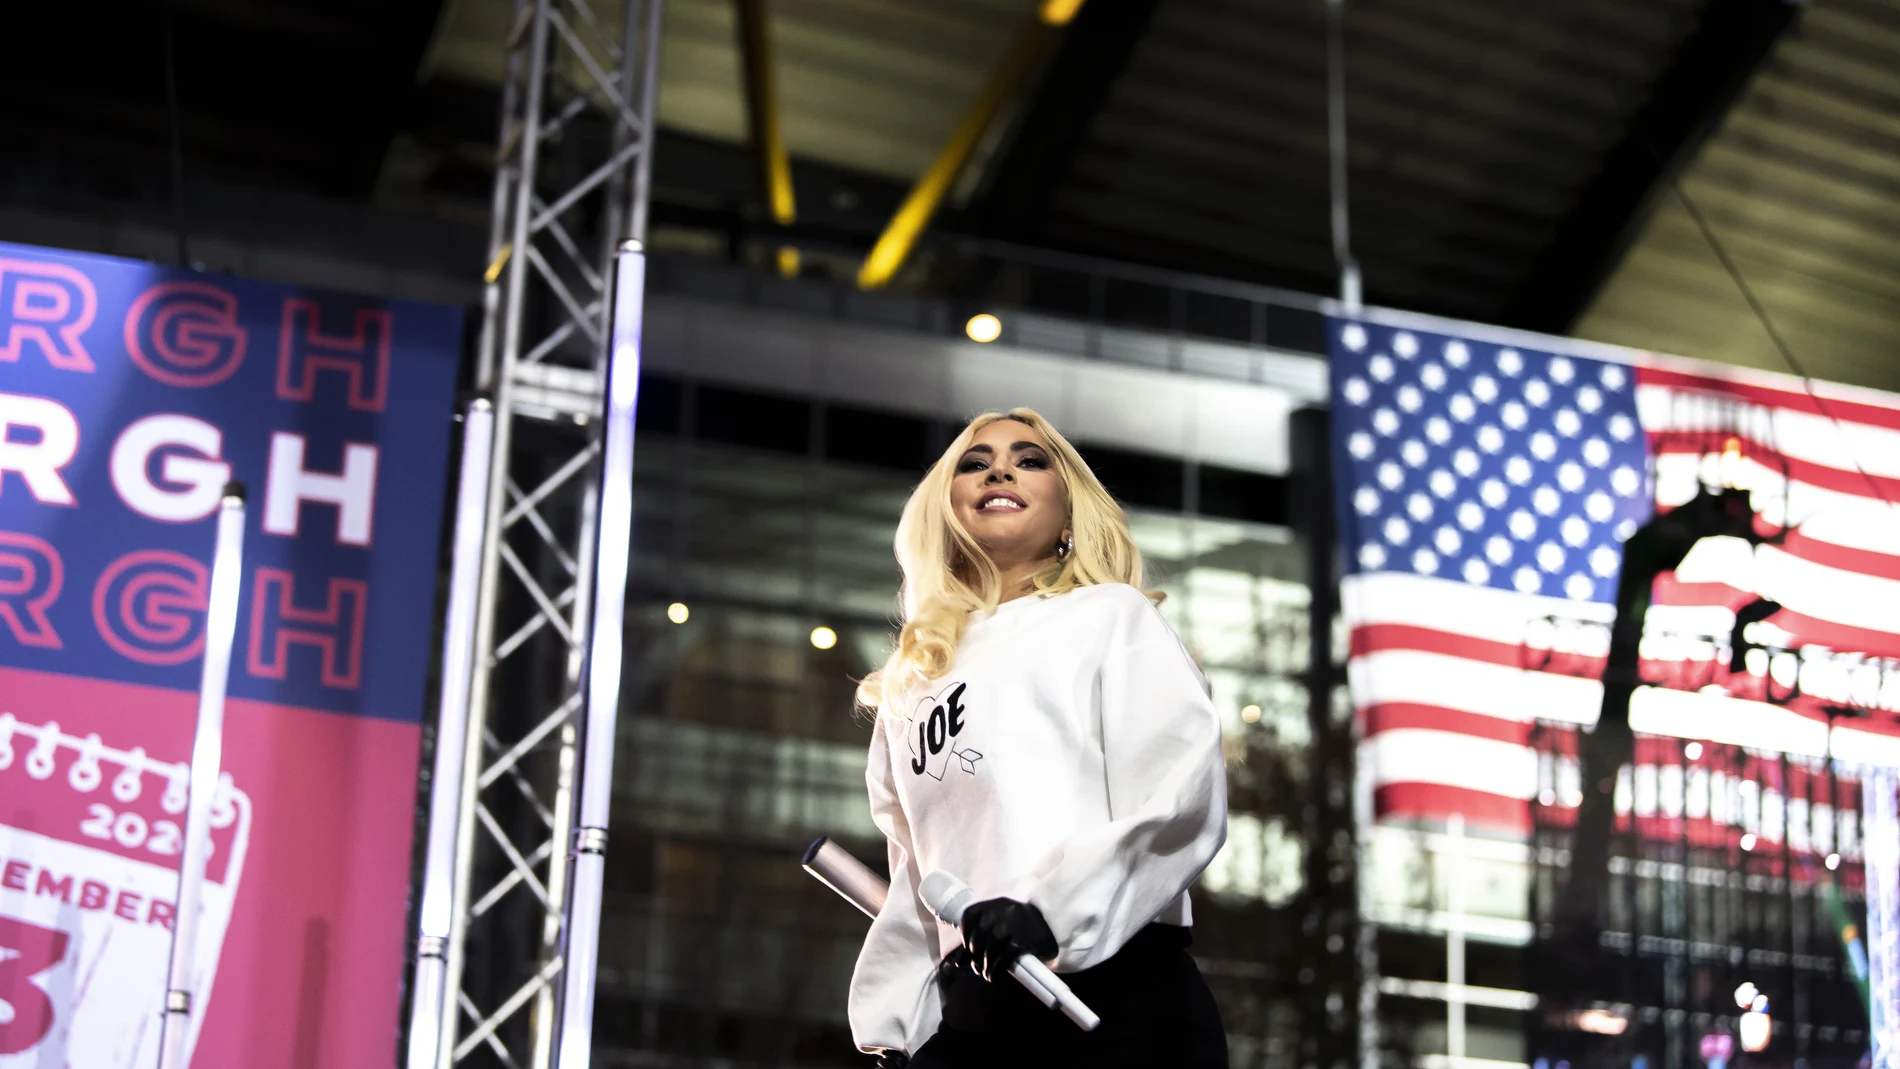 Lady Gaga takes the stage to perform during a drive-in campaign event for Democratic presidential candidate and former Vice President Joe Biden in the parking lot outside of Heinz Field on Pittsburgh's North Shore, Monday, Nov. 2, 2020. (Alexandra Wimley/Pittsburgh Post-Gazette via AP)